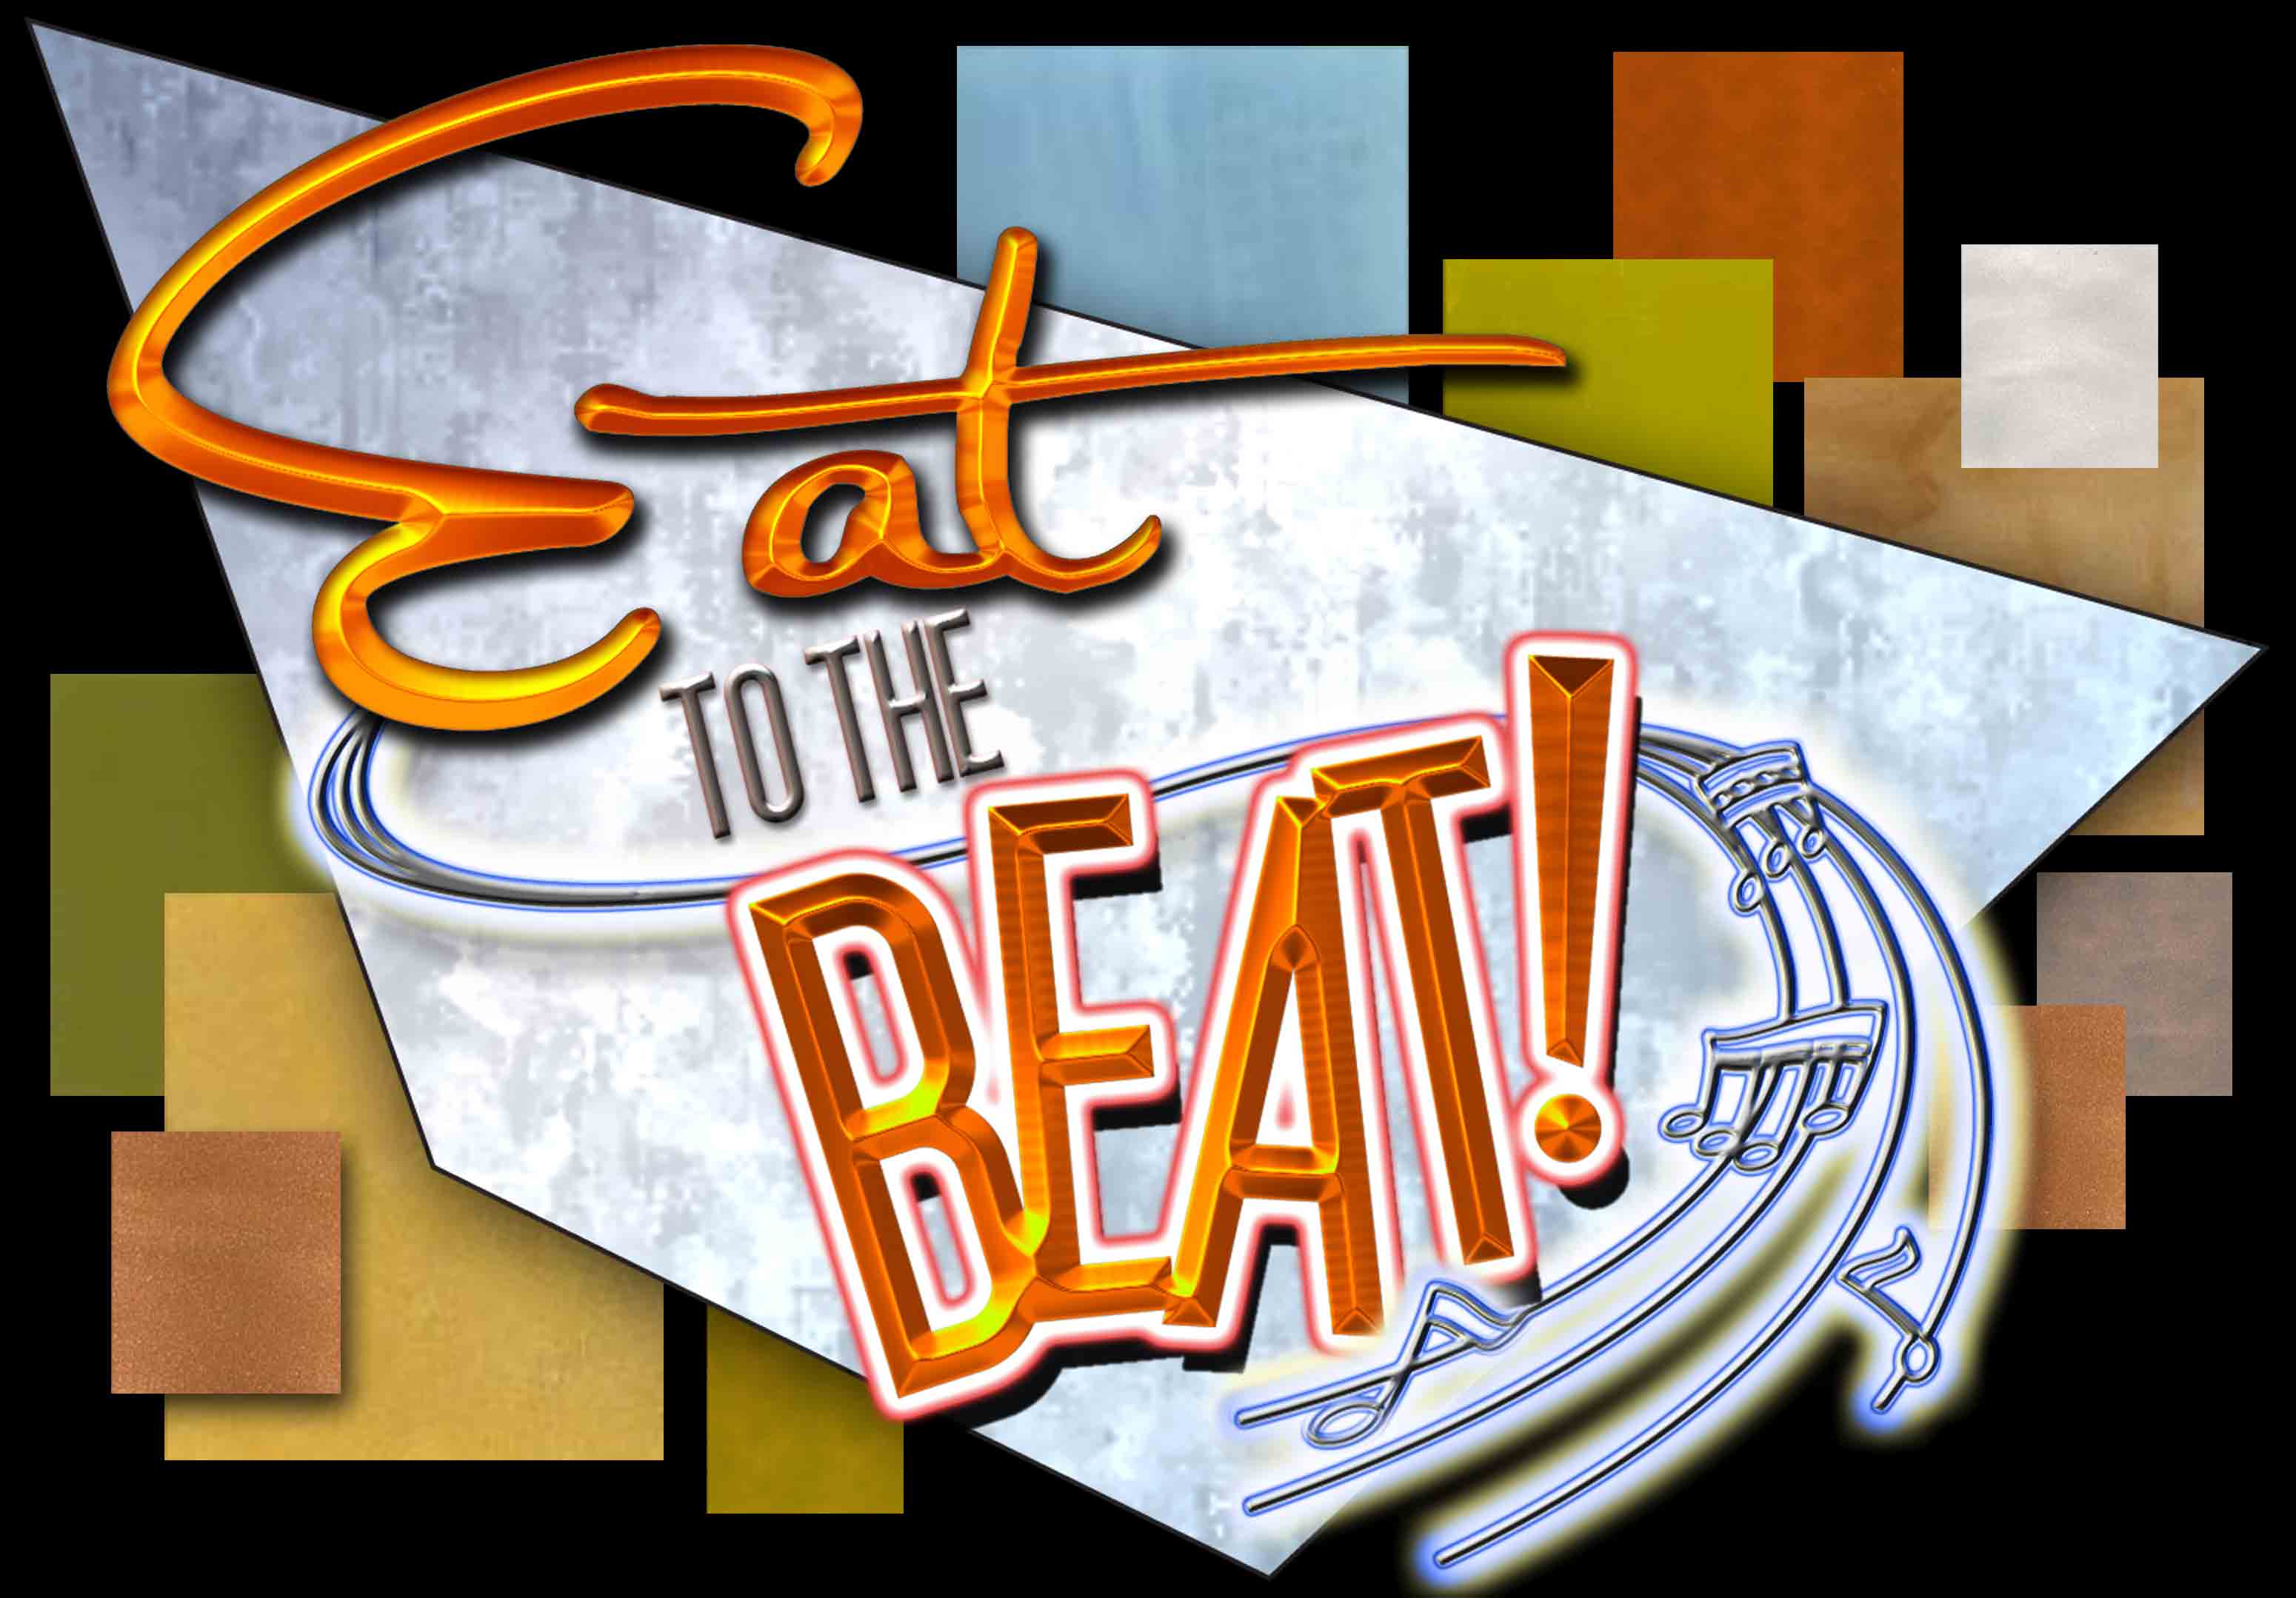 Four new acts join the “Eat to the Beat” Concert Series during Epcot’s Food & Wine Festival